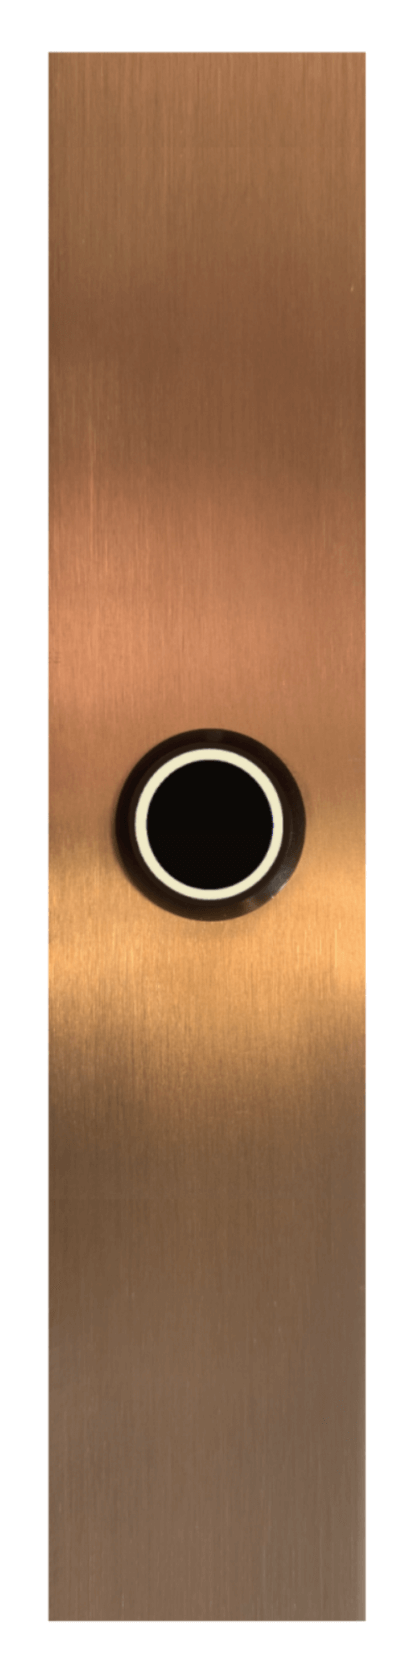 Modern copper doorbell with white LED